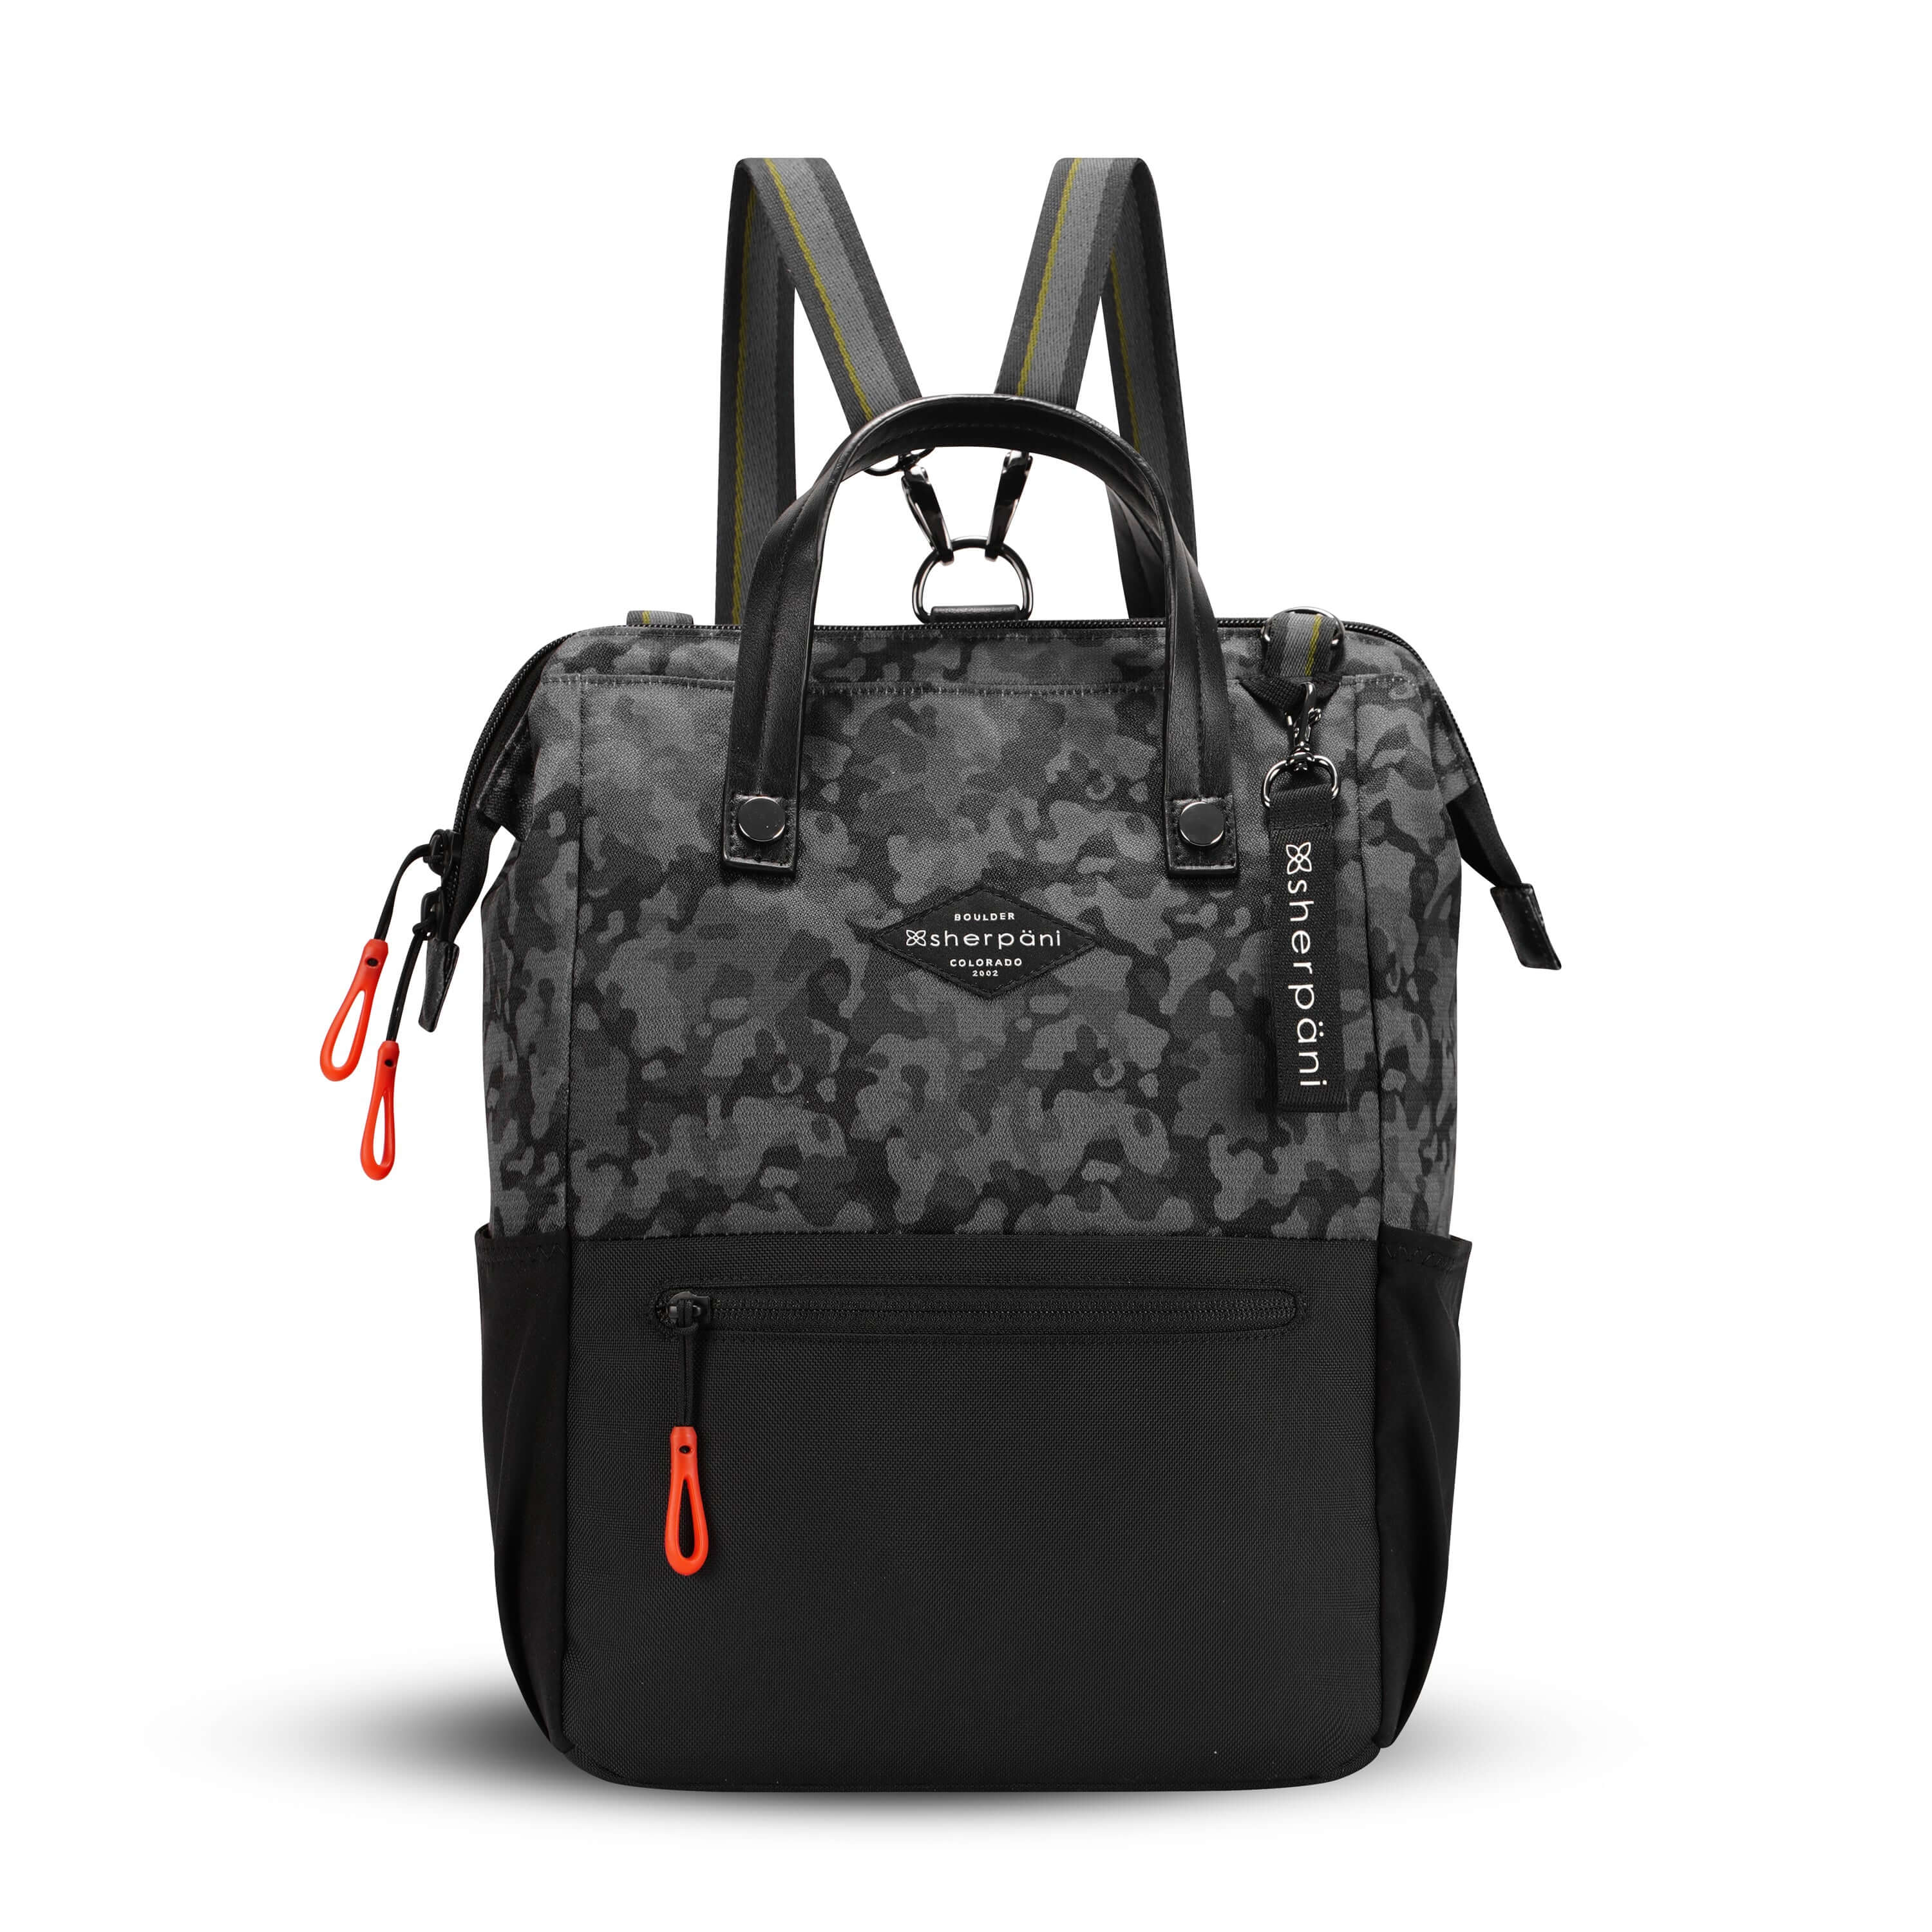 Flat front view of Sherpani three in one bag, the Dispatch in Dream Camo. The bag is two toned: the top is a camouflage pattern of black and gray, and the bottom is black. There is an external zipper pocket on the front panel. Easy pull zippers are accented in red. A branded Sherpani keychain is clipped to the upper right corner. Elastic water bottle holders sit on either side of the bag. It has short tote handles and adjustable straps that can function for a backpack or crossbody. 